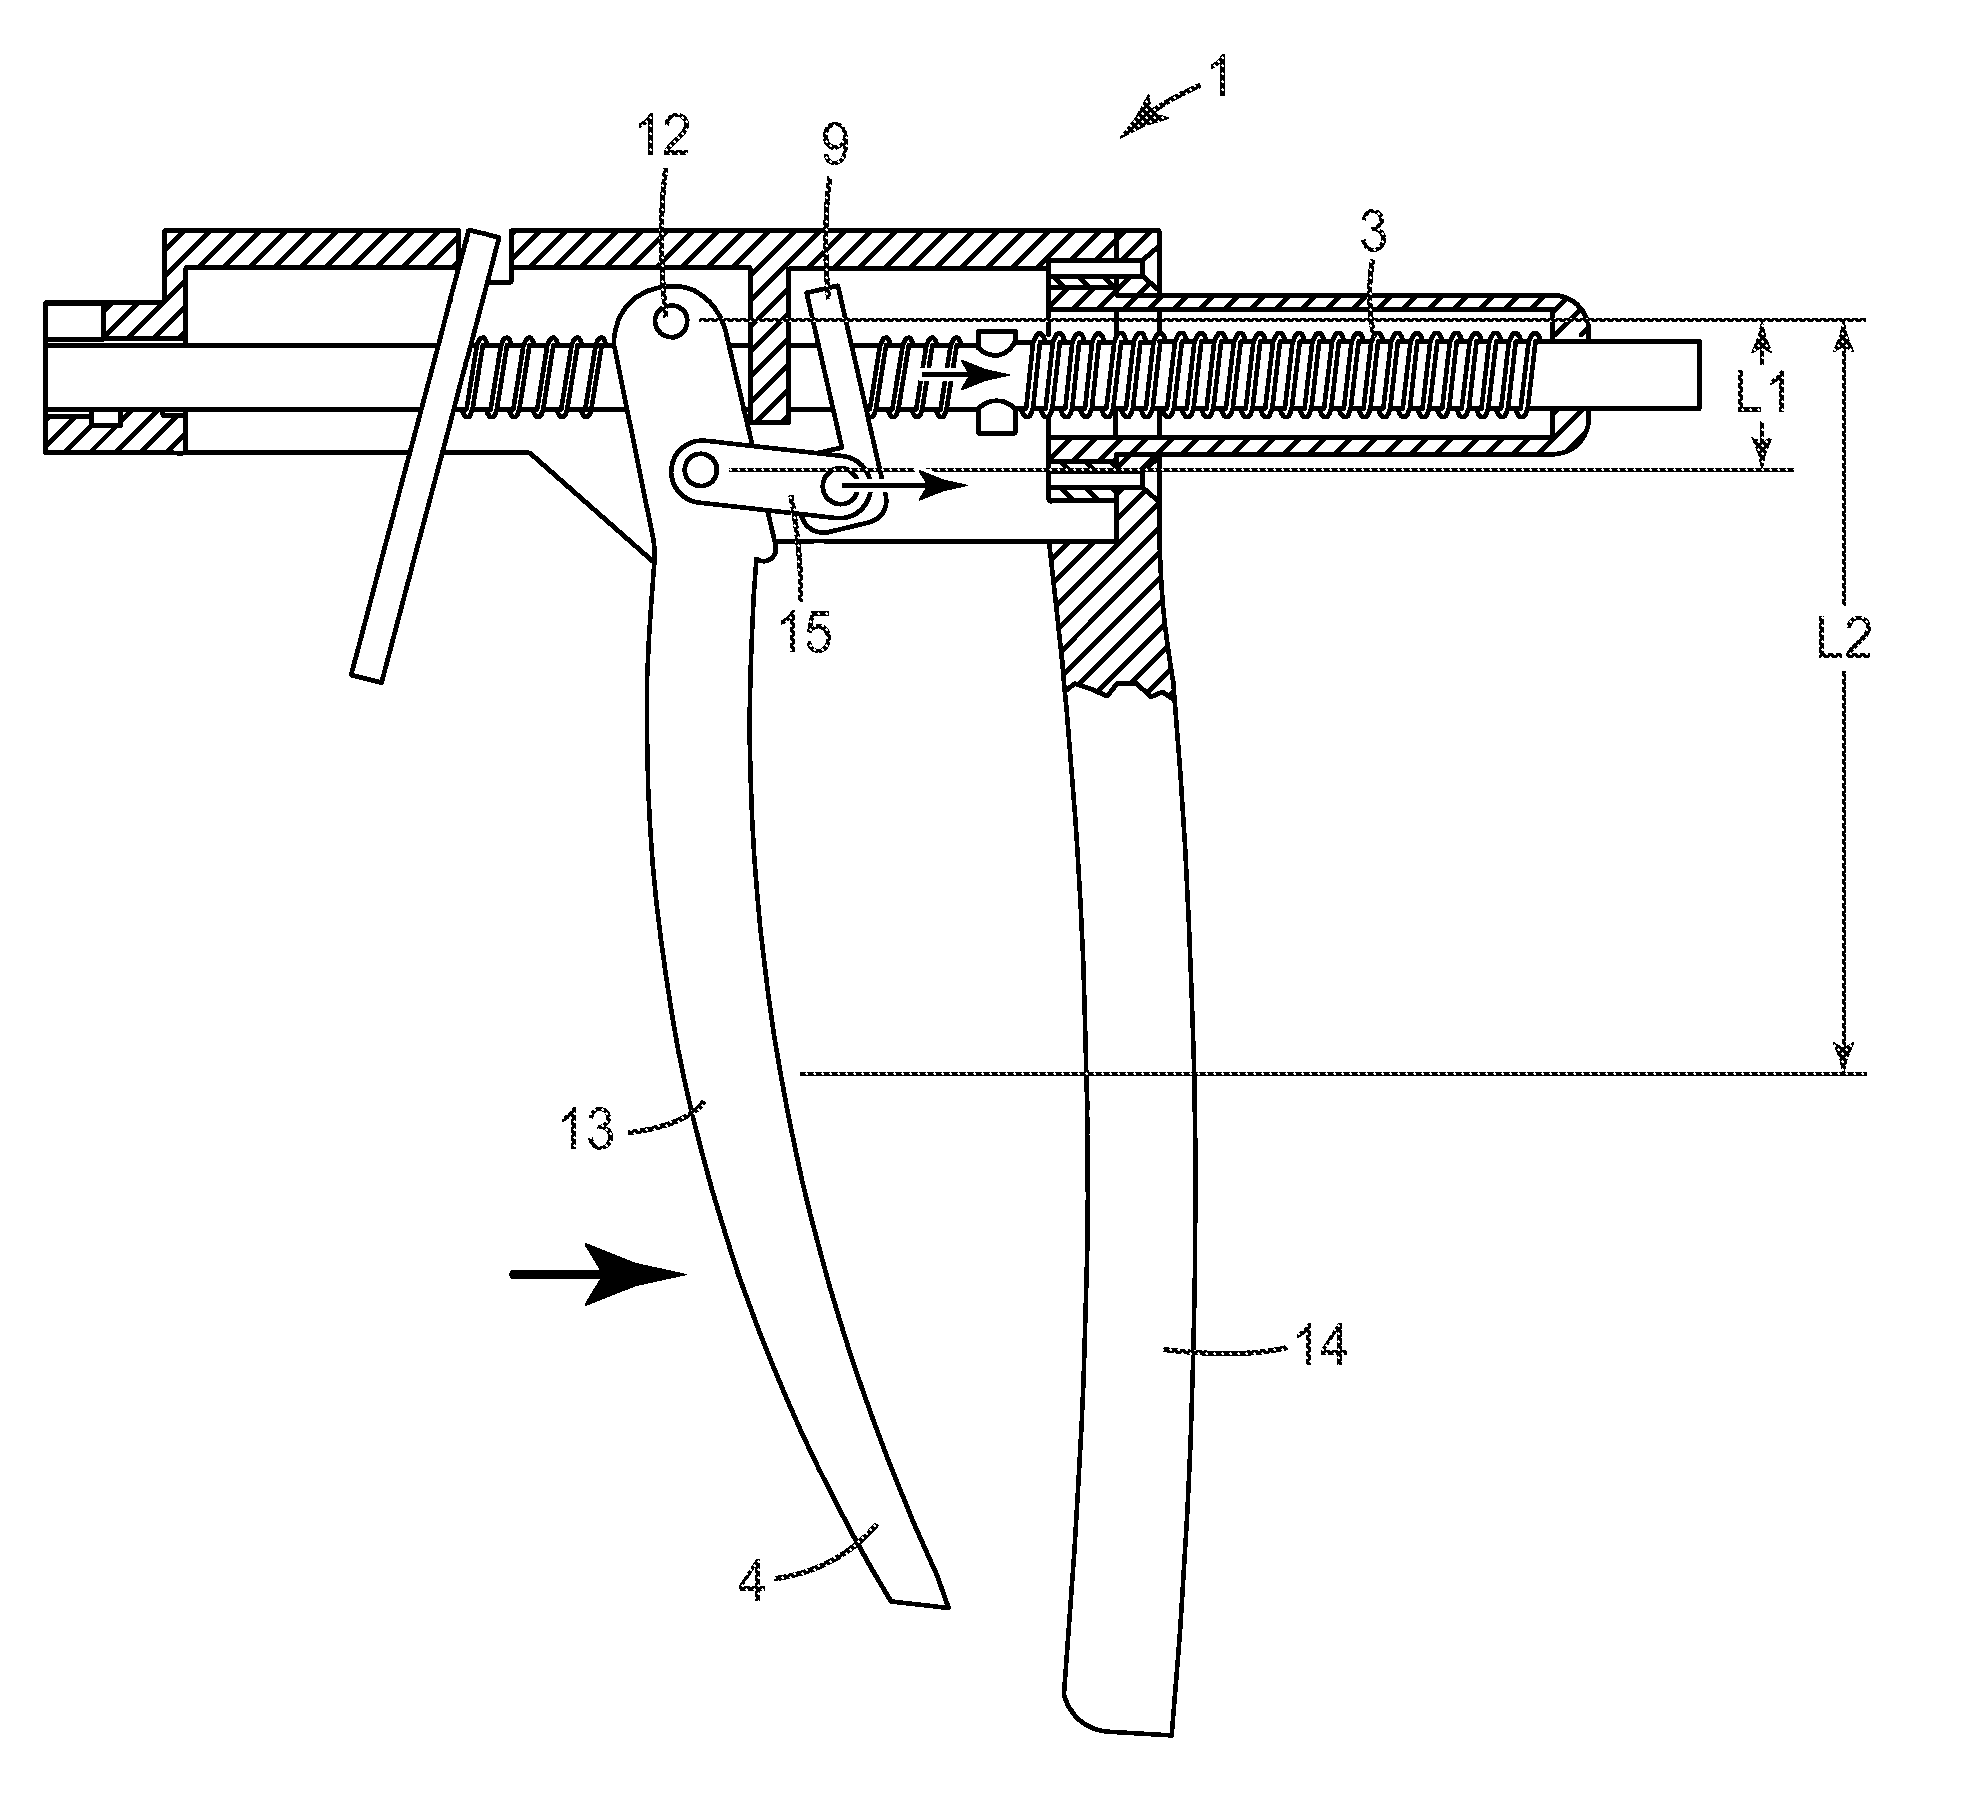 Device for dispensing a dental composition